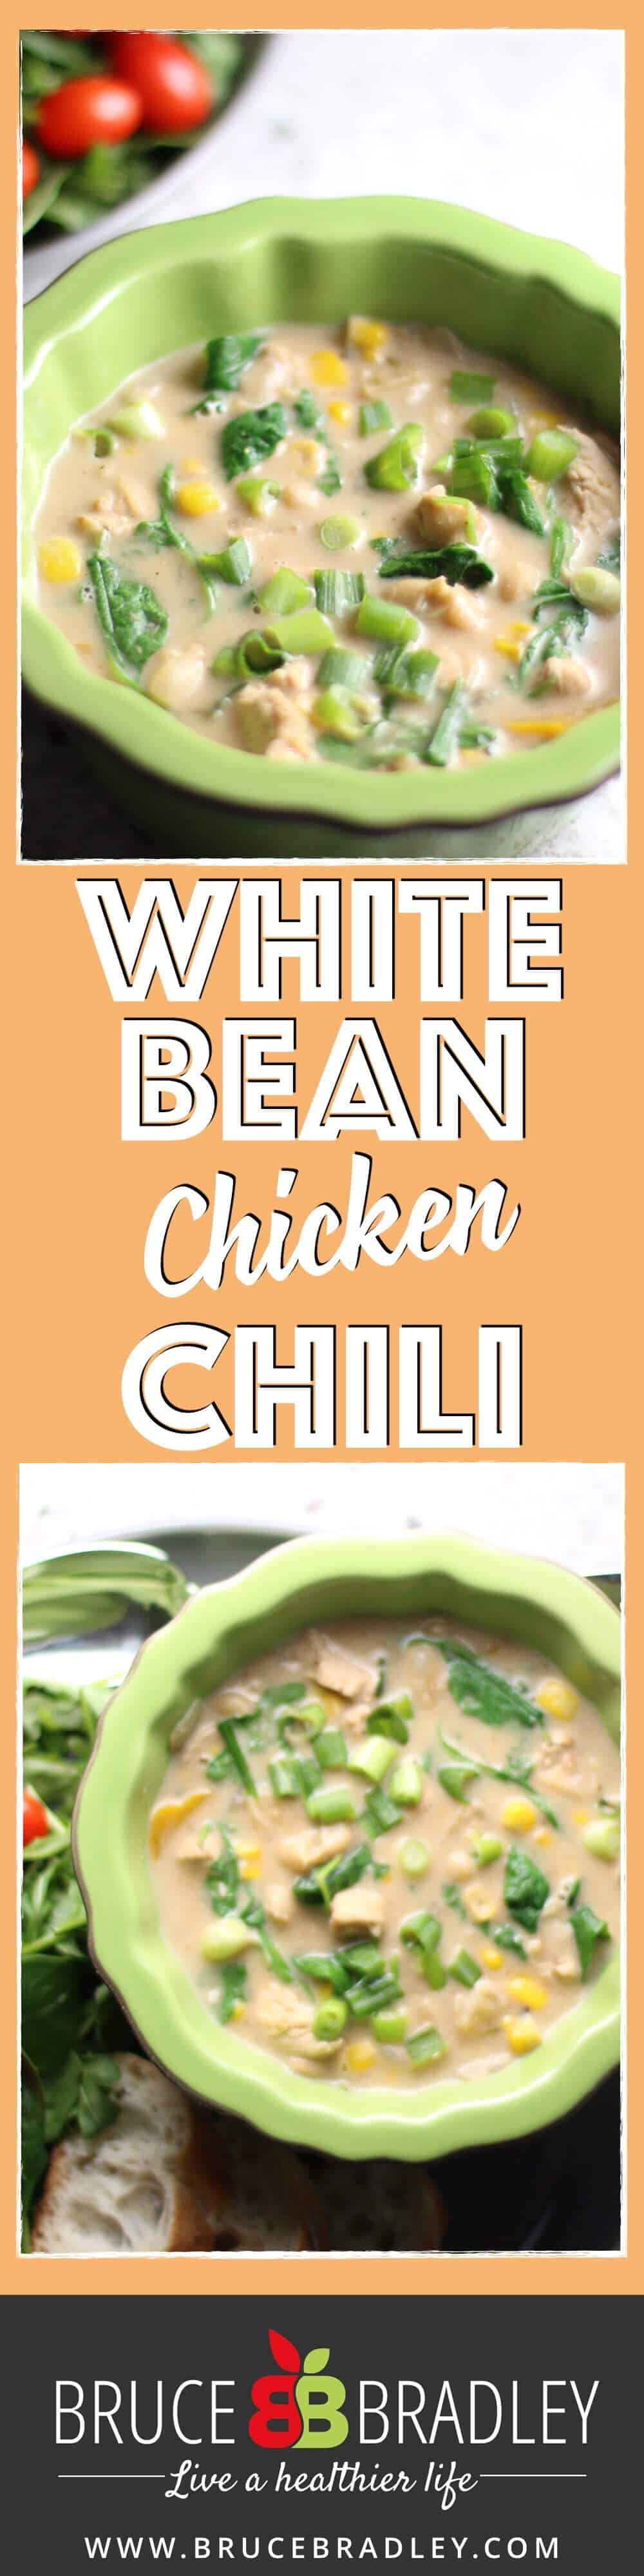 Made With Fresh, Real Ingredients Like Onions, Garlic, Red Pepper, Chicken, White Beans, Corn, Fresh Greens, And A Delicious Blend Of Spices, This White Bean Chicken Chili Recipe Packs A Flavorful Punch.